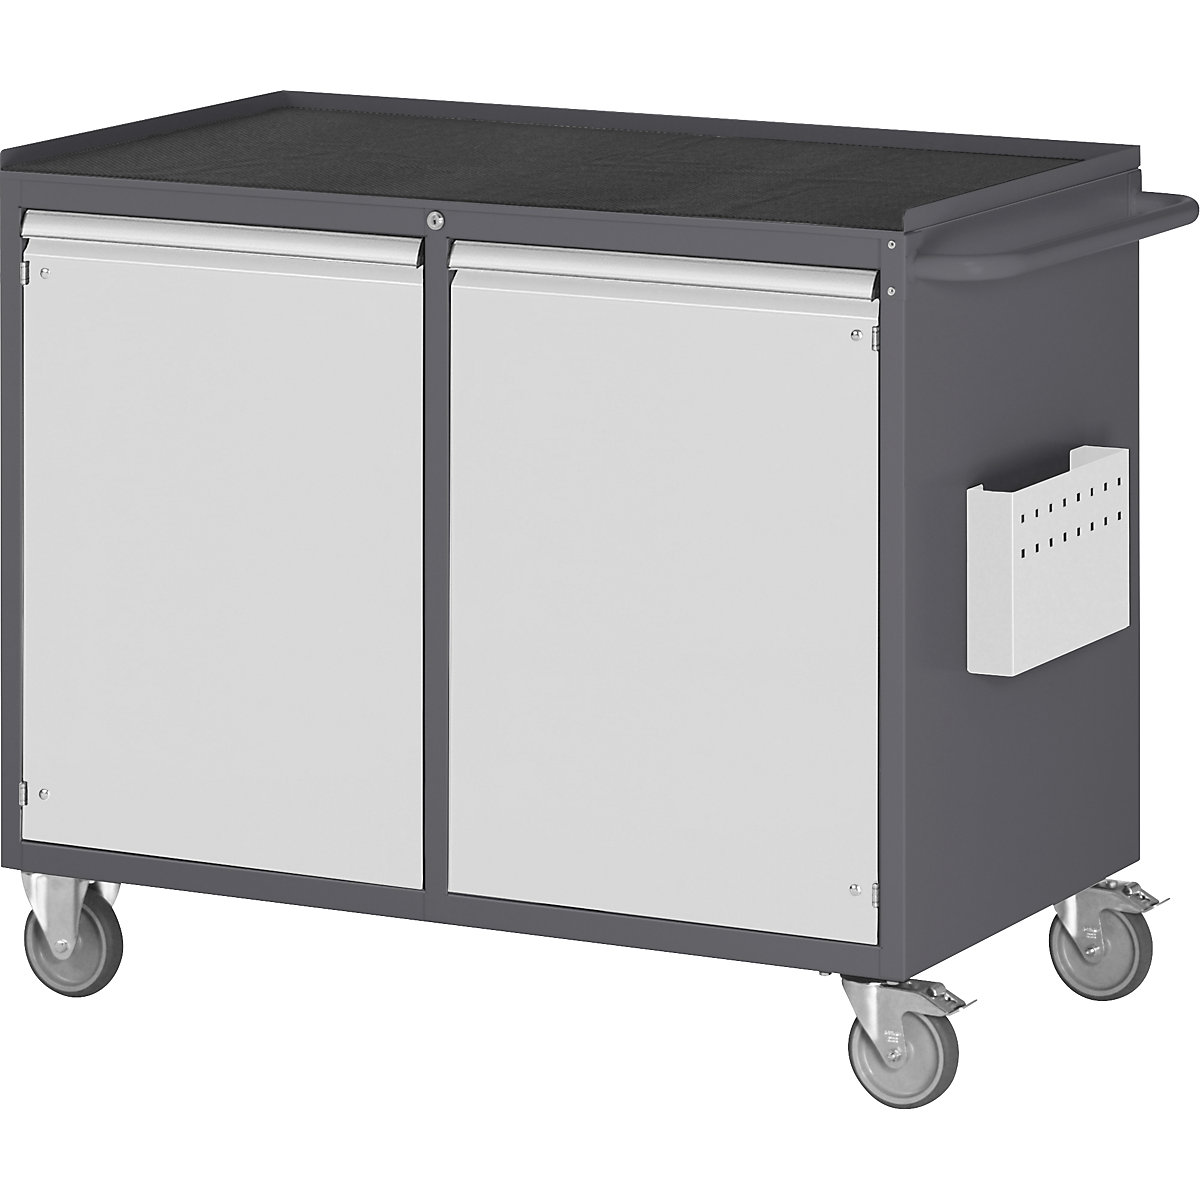 Compact workbenches, mobile – RAU, 2 doors, metal tray with rubber mat, charcoal / light grey-2